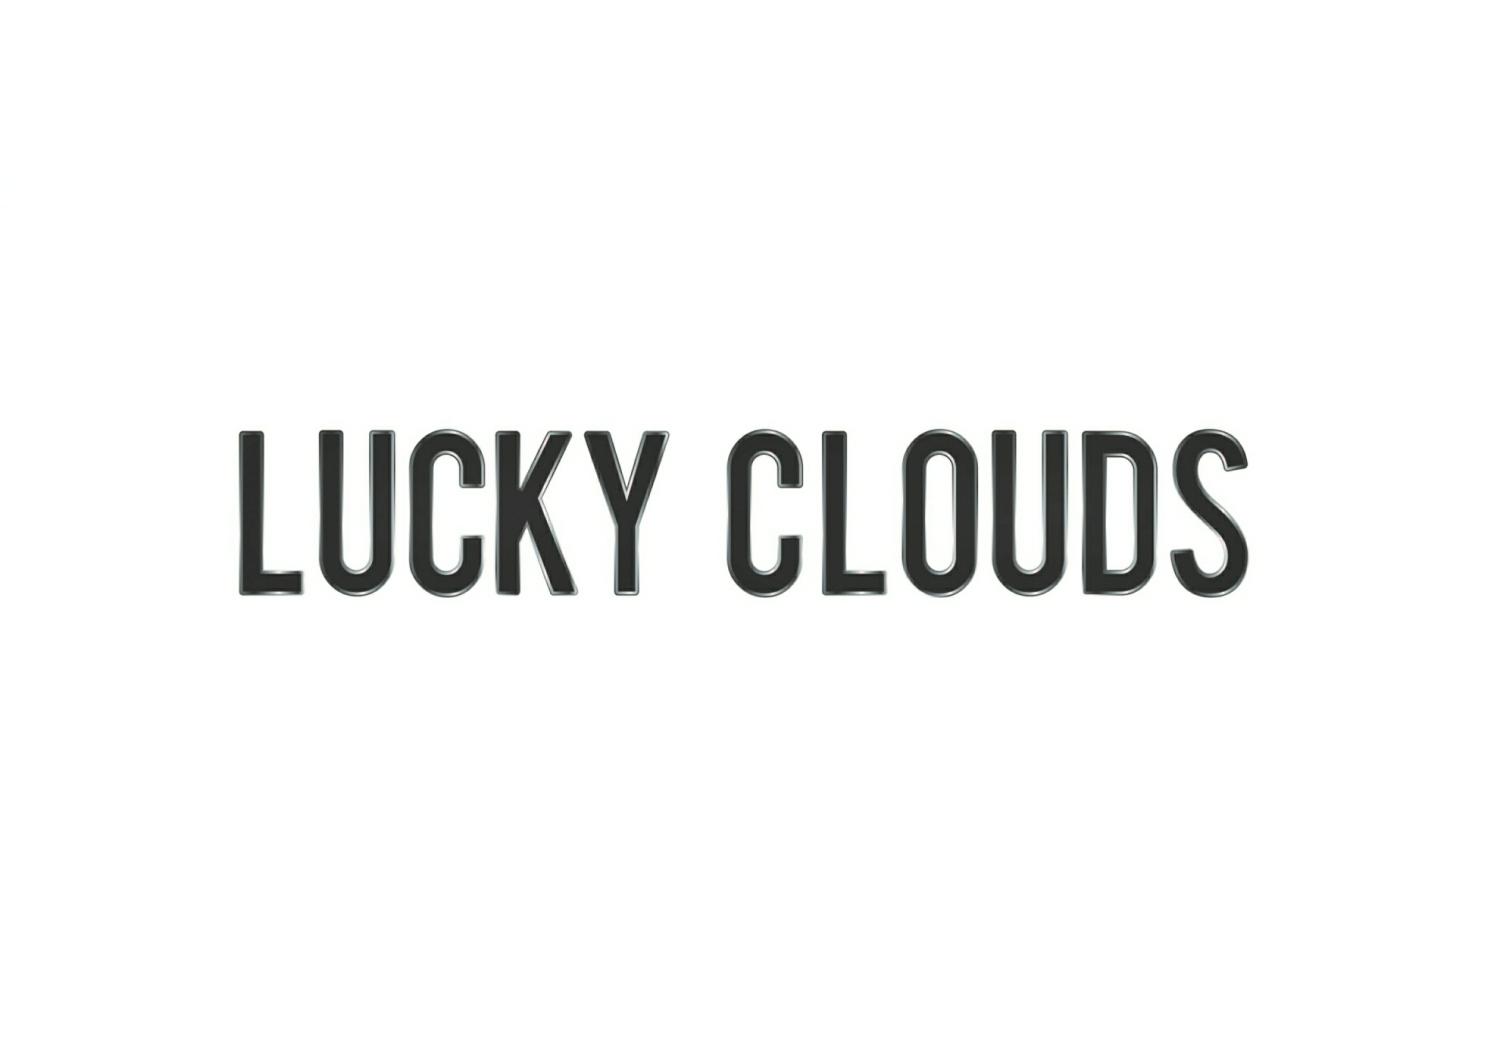 LUCKY CLOUDS